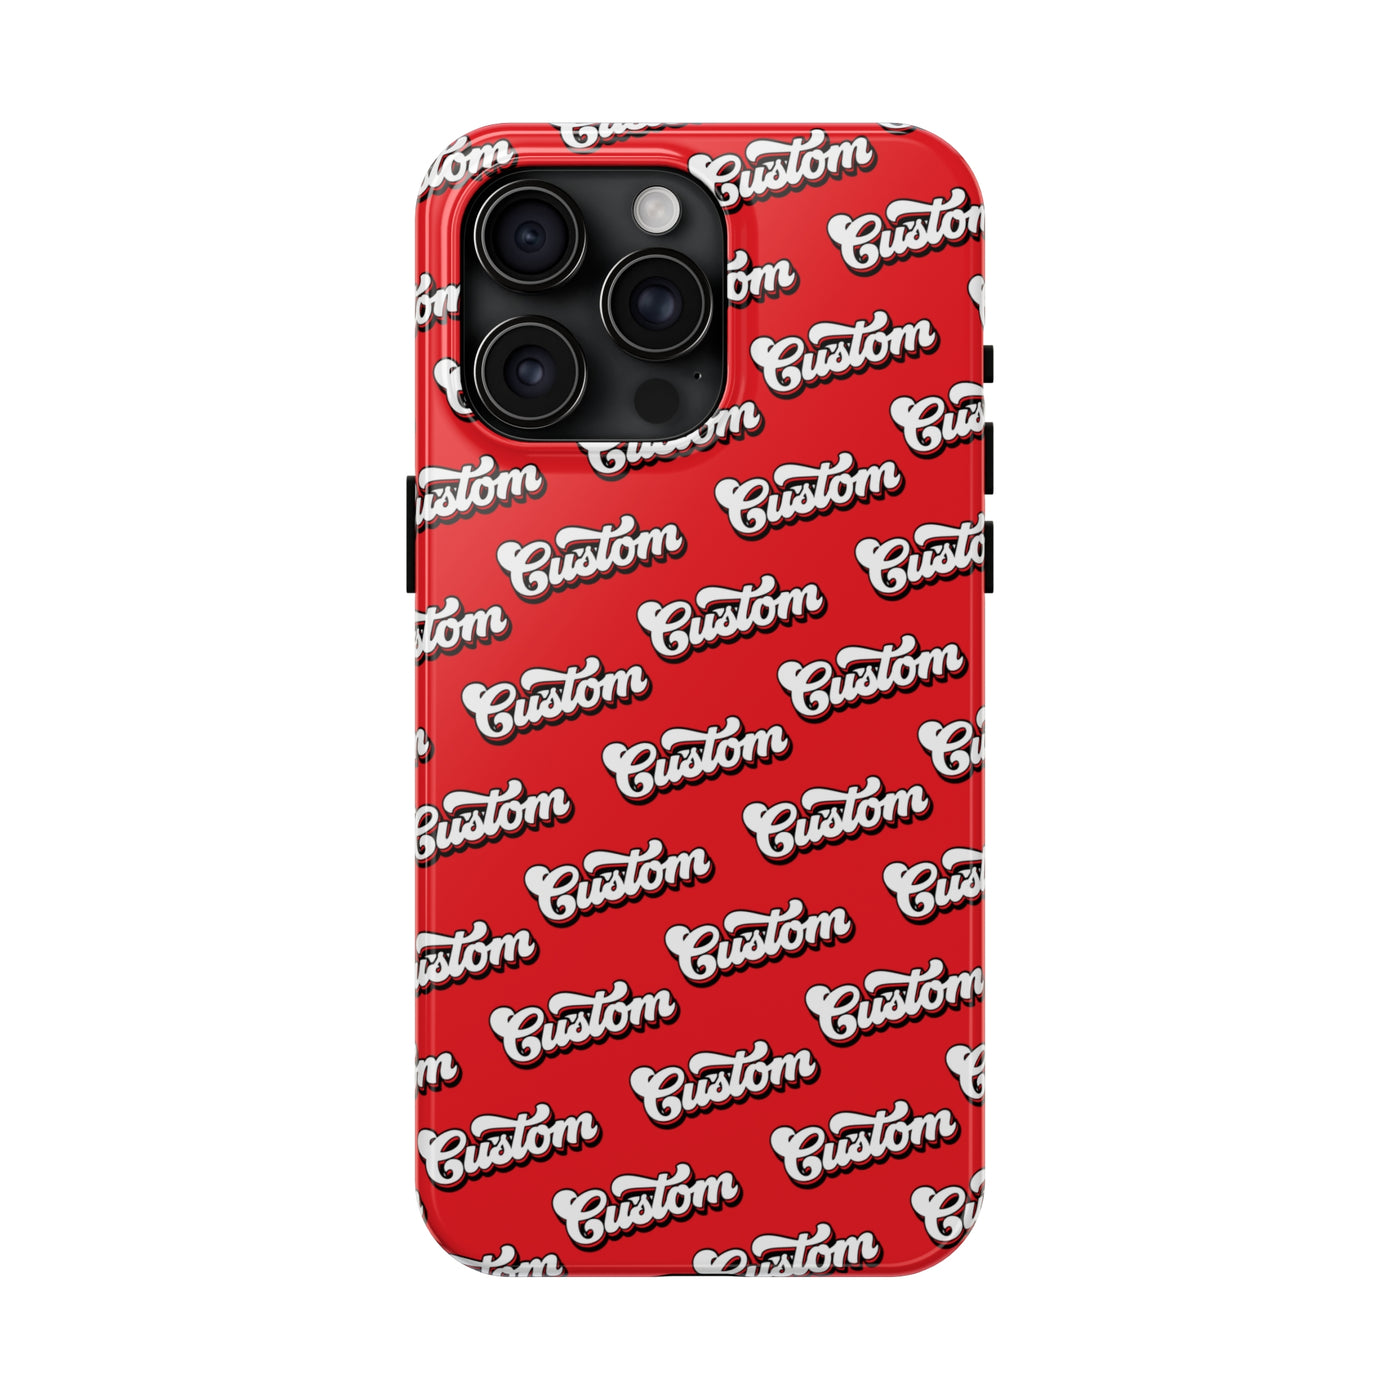 Copy of Trendy Bow Phone Case, Bed Party Bow Iphone case, Bow Phone Case, College Case, Bow Gift - Maryland, Terps, Terrapins, UMD, Red Gold & Black